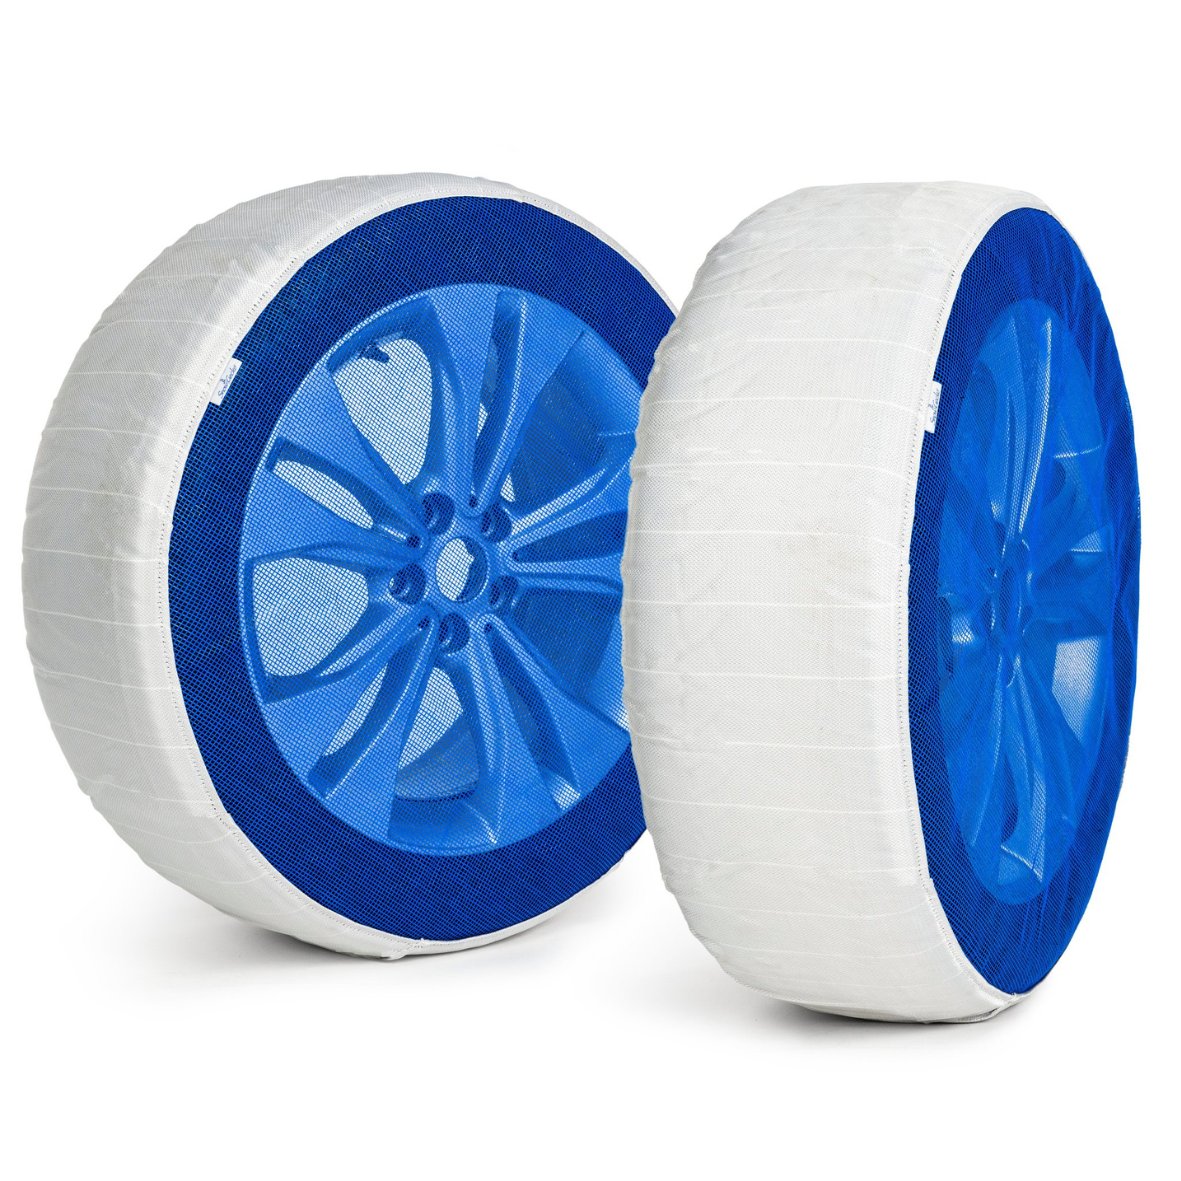 Pair of SnowGecko L Large textile snow chains installed on two wheels in front of white background showing product frontside 